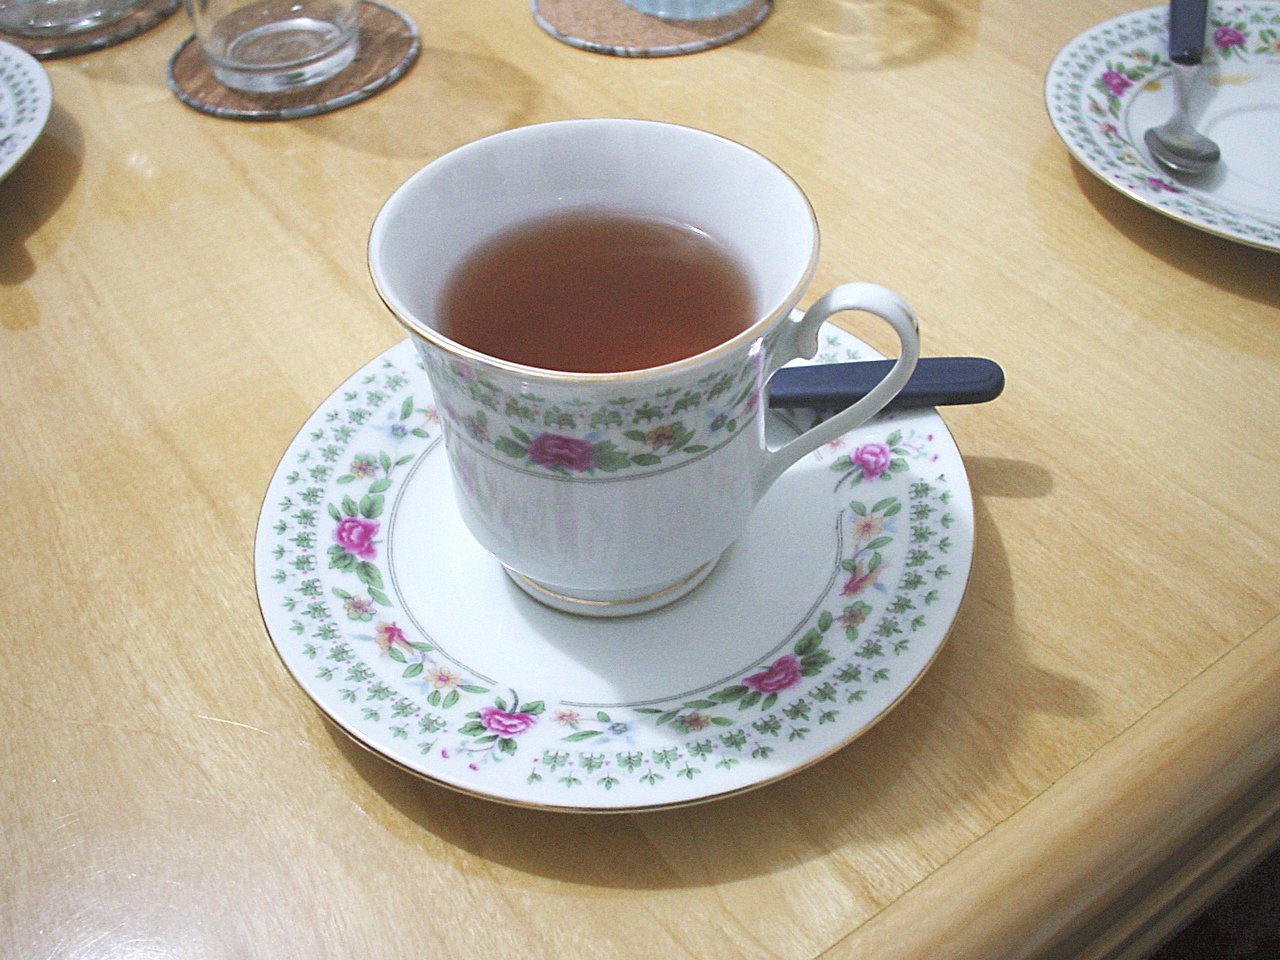 there is a cup of tea on the table